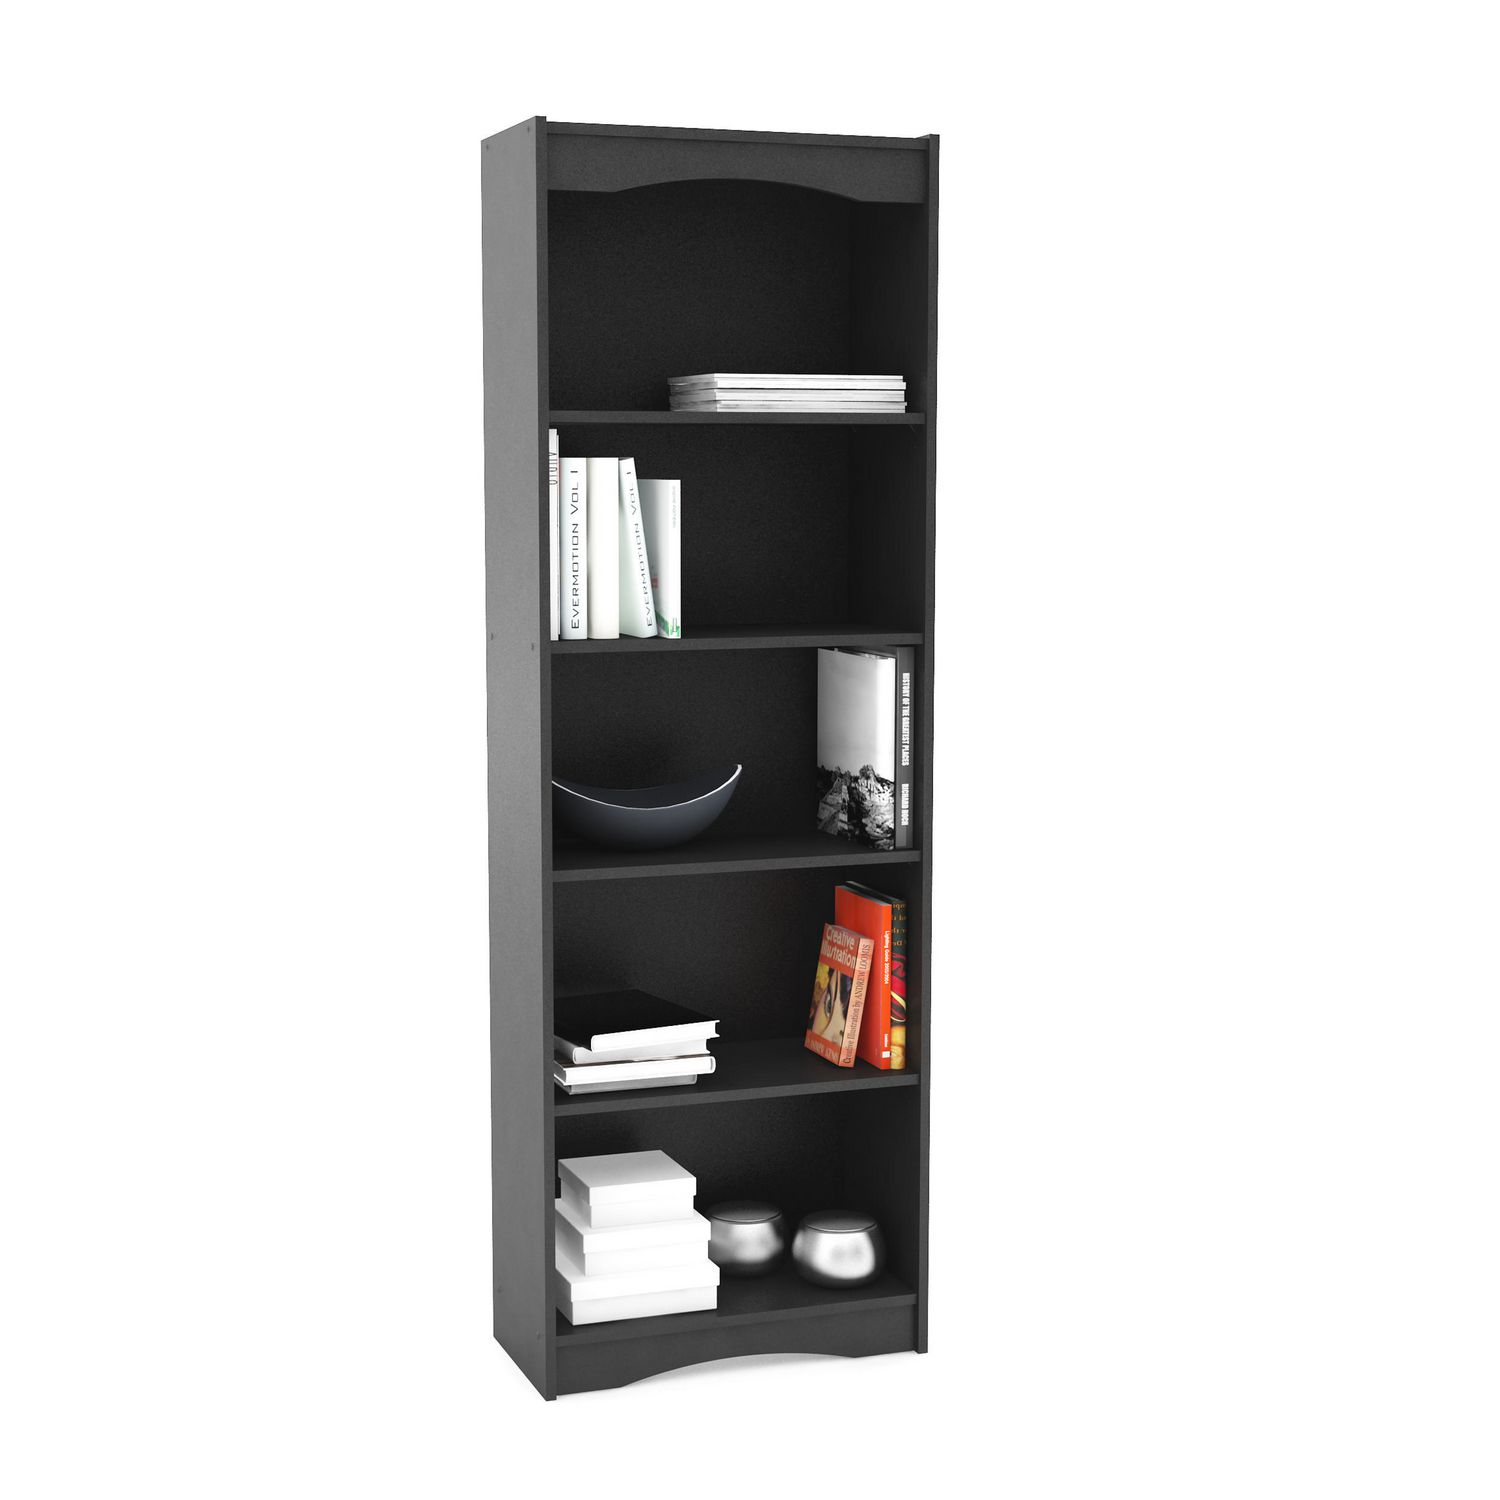 Corliving Hawthorn 72 Tall Bookcase, Sonax Hawthorn 72 Inch Tall Bookcase